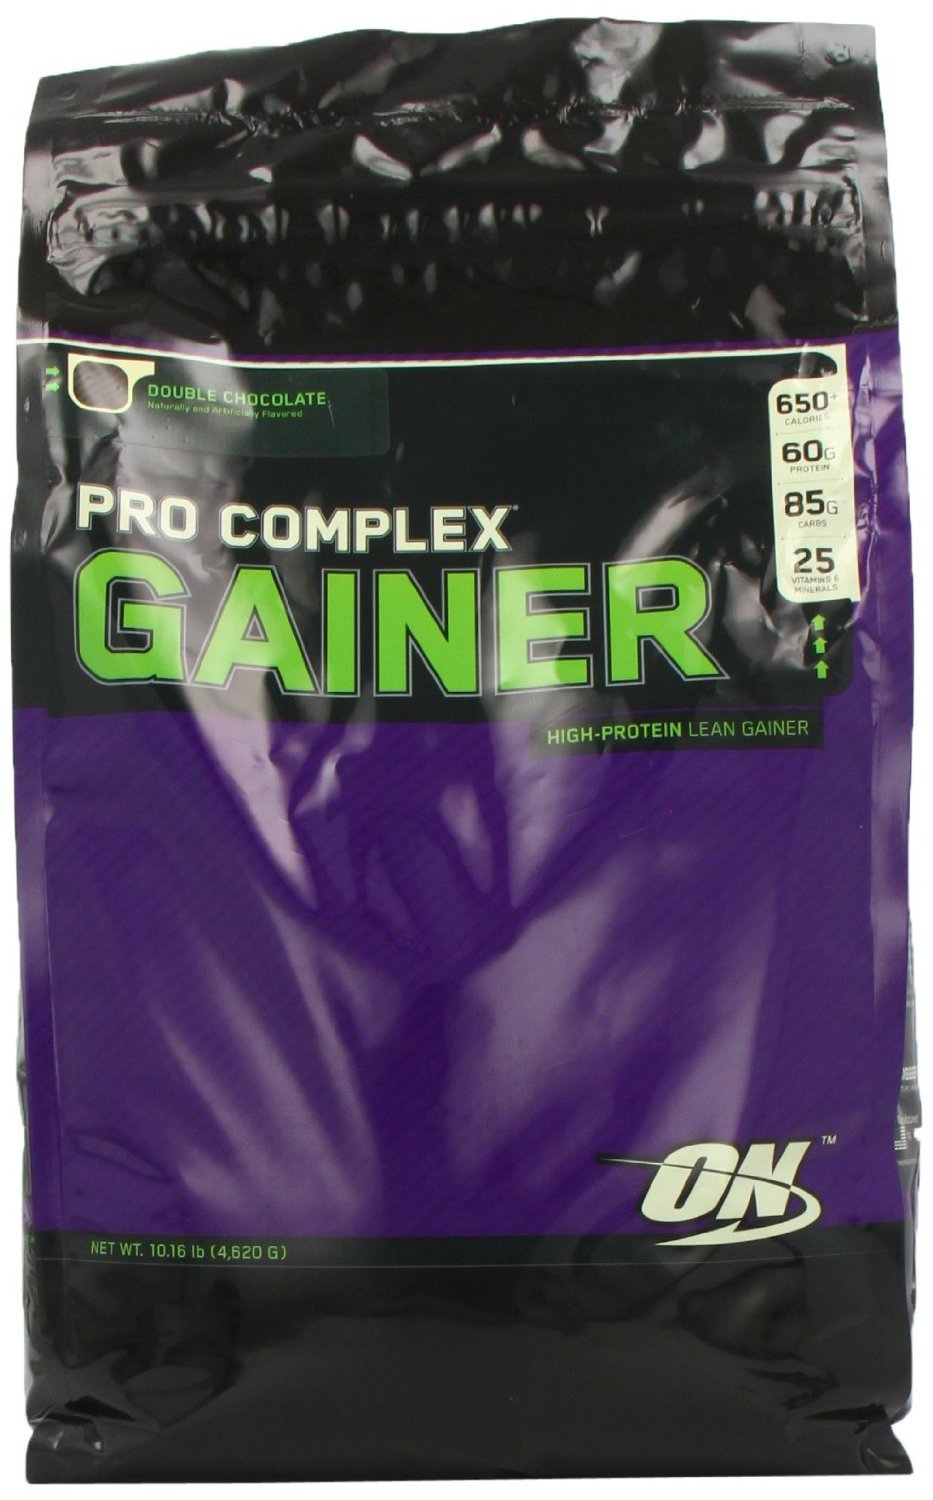 Pro Complex Gainer, 4620 g, Optimum Nutrition. Gainer. Mass Gain Energy & Endurance recovery 